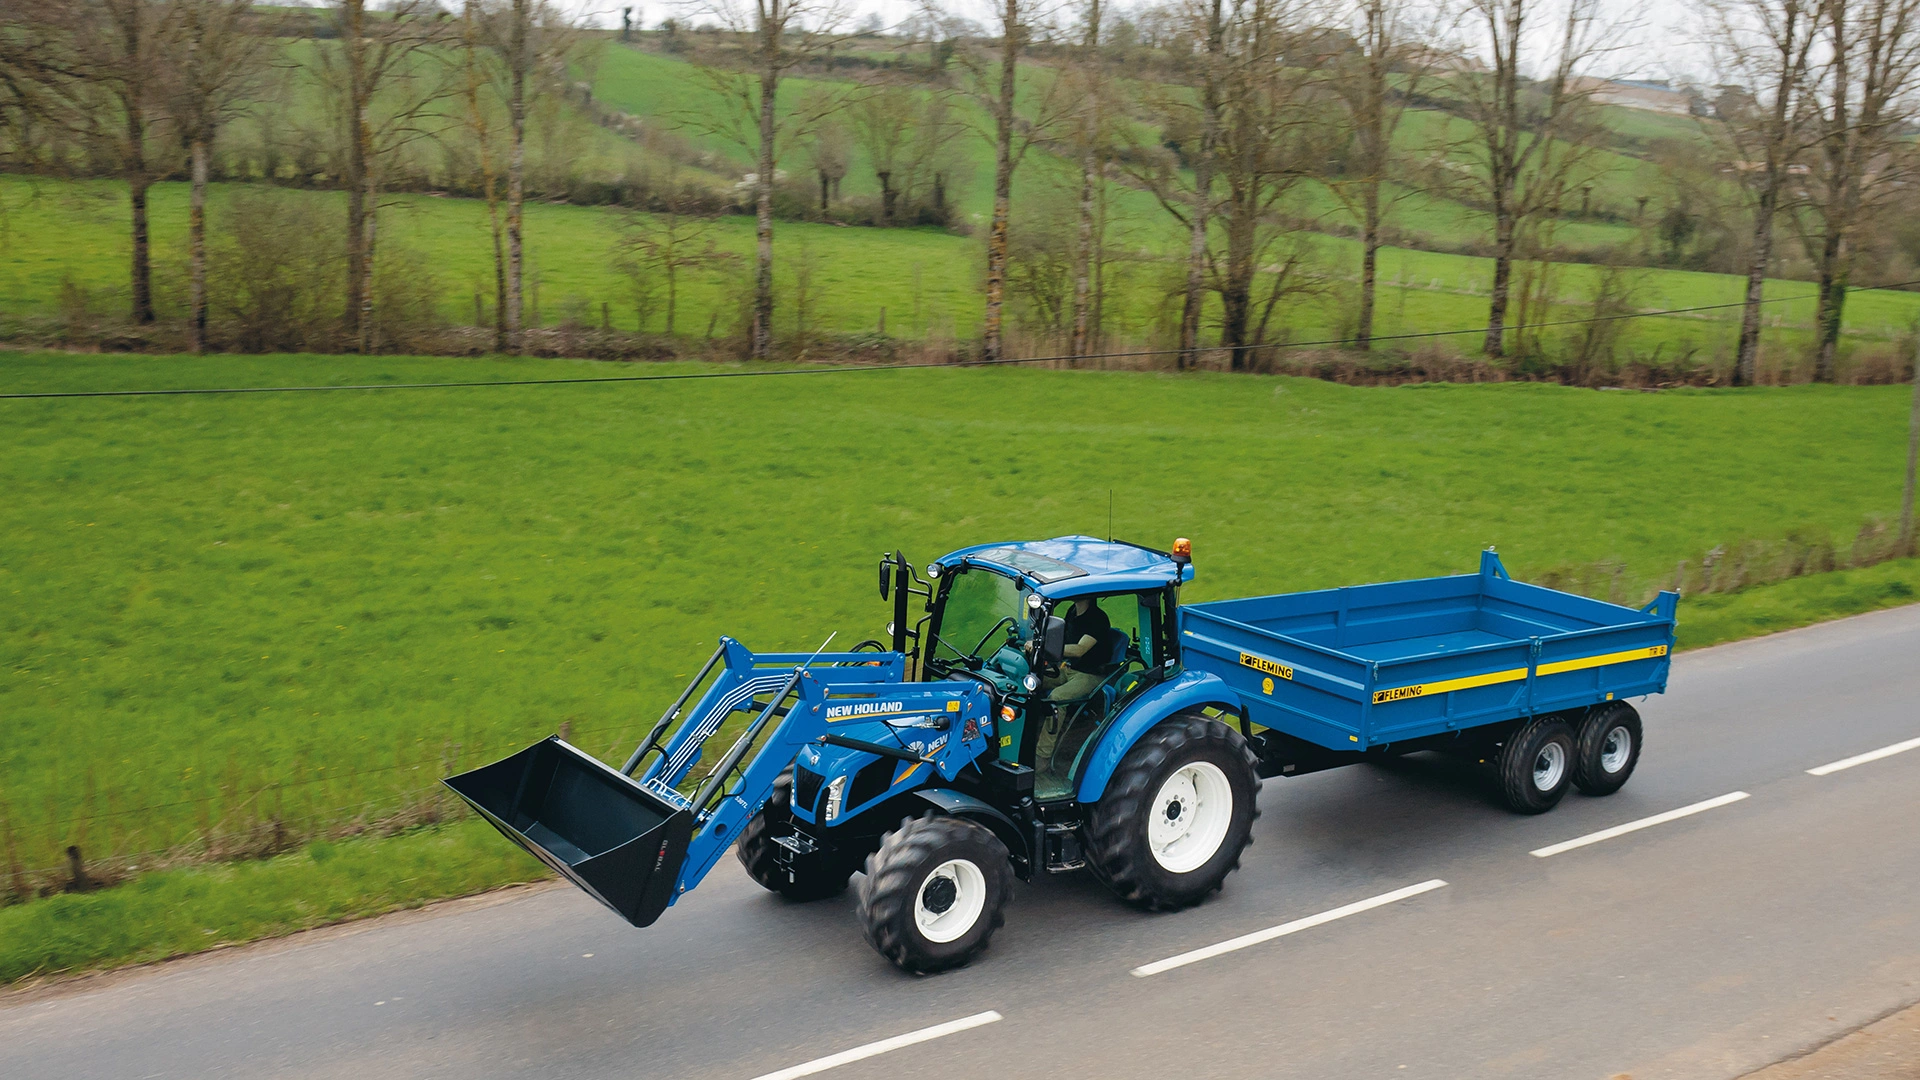 A blue New Holland tractor with a front loader attachment driving on a road, pulling a blue Fleming trailer, with a lush green field and trees in the background.